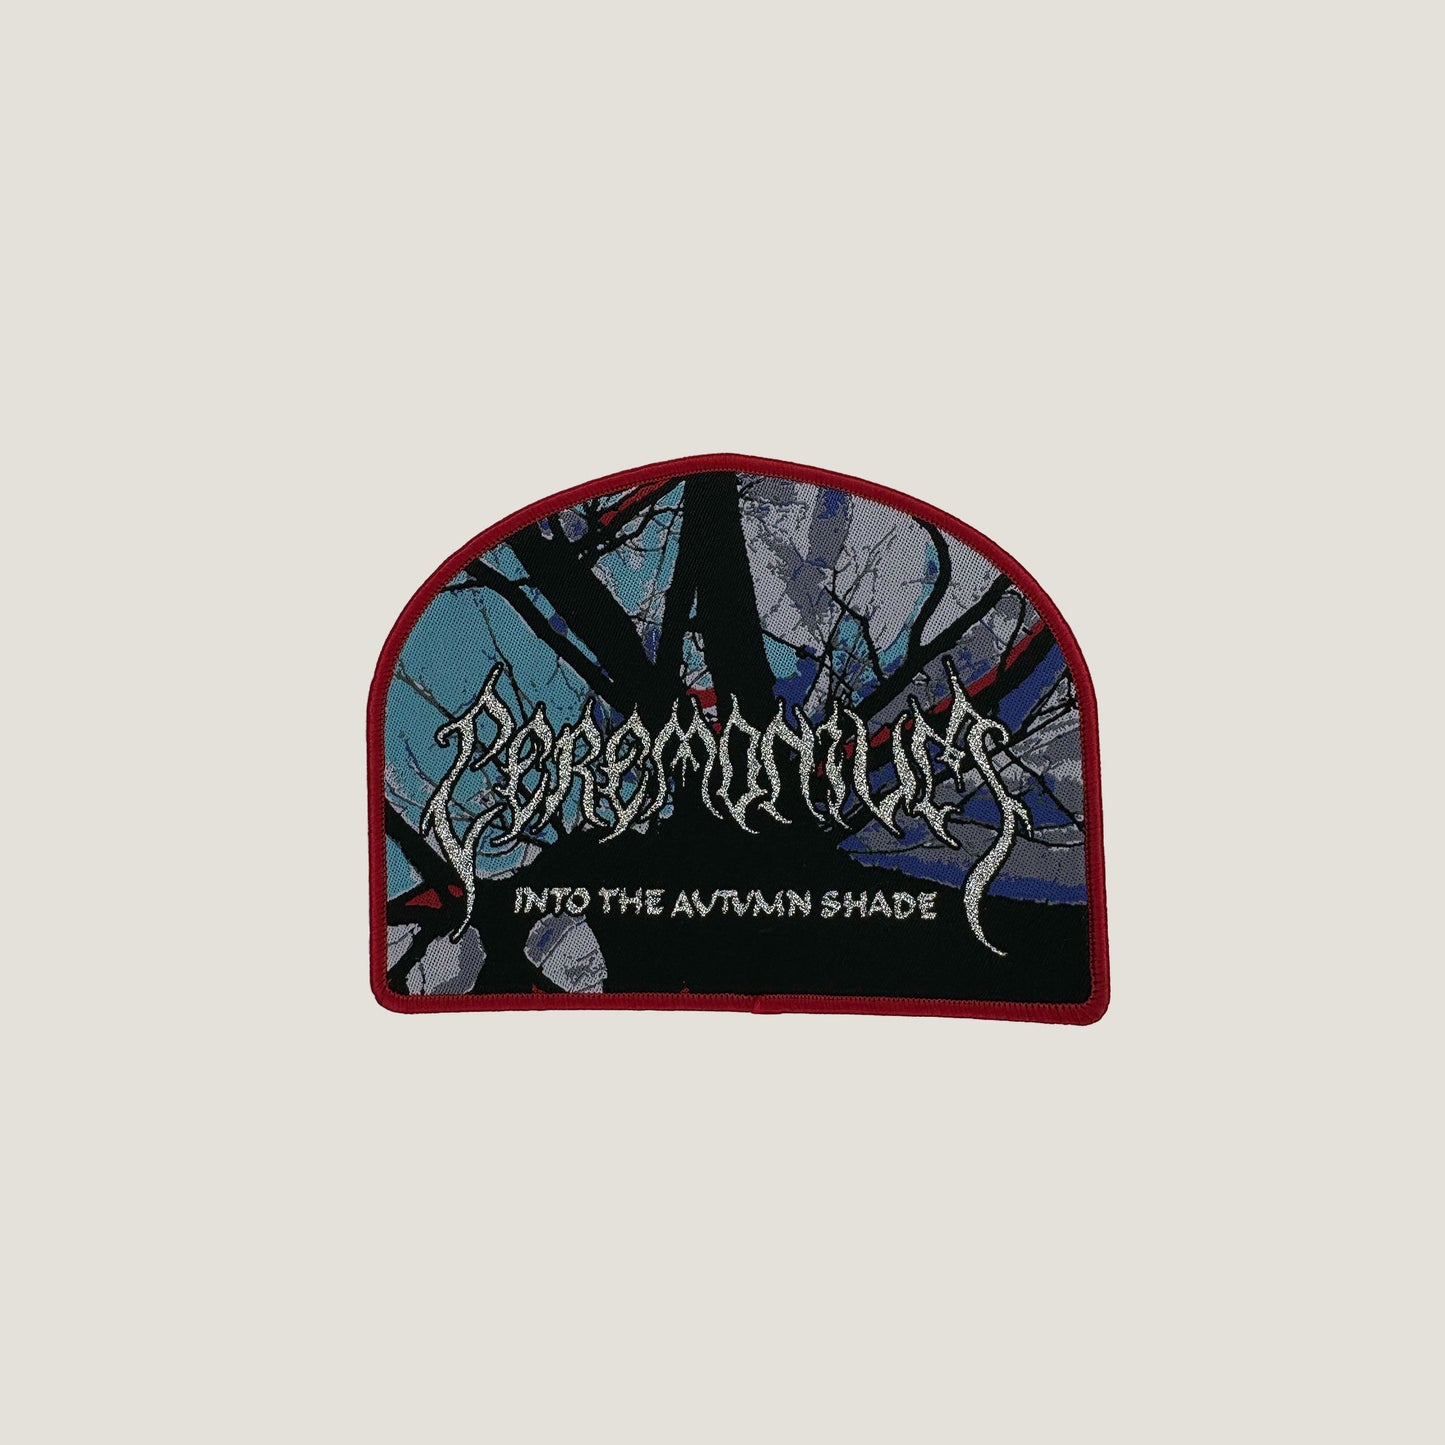 Temporal Dimensions Patches Ceremonium Into The Autumn Shade Red Border Woven Patch